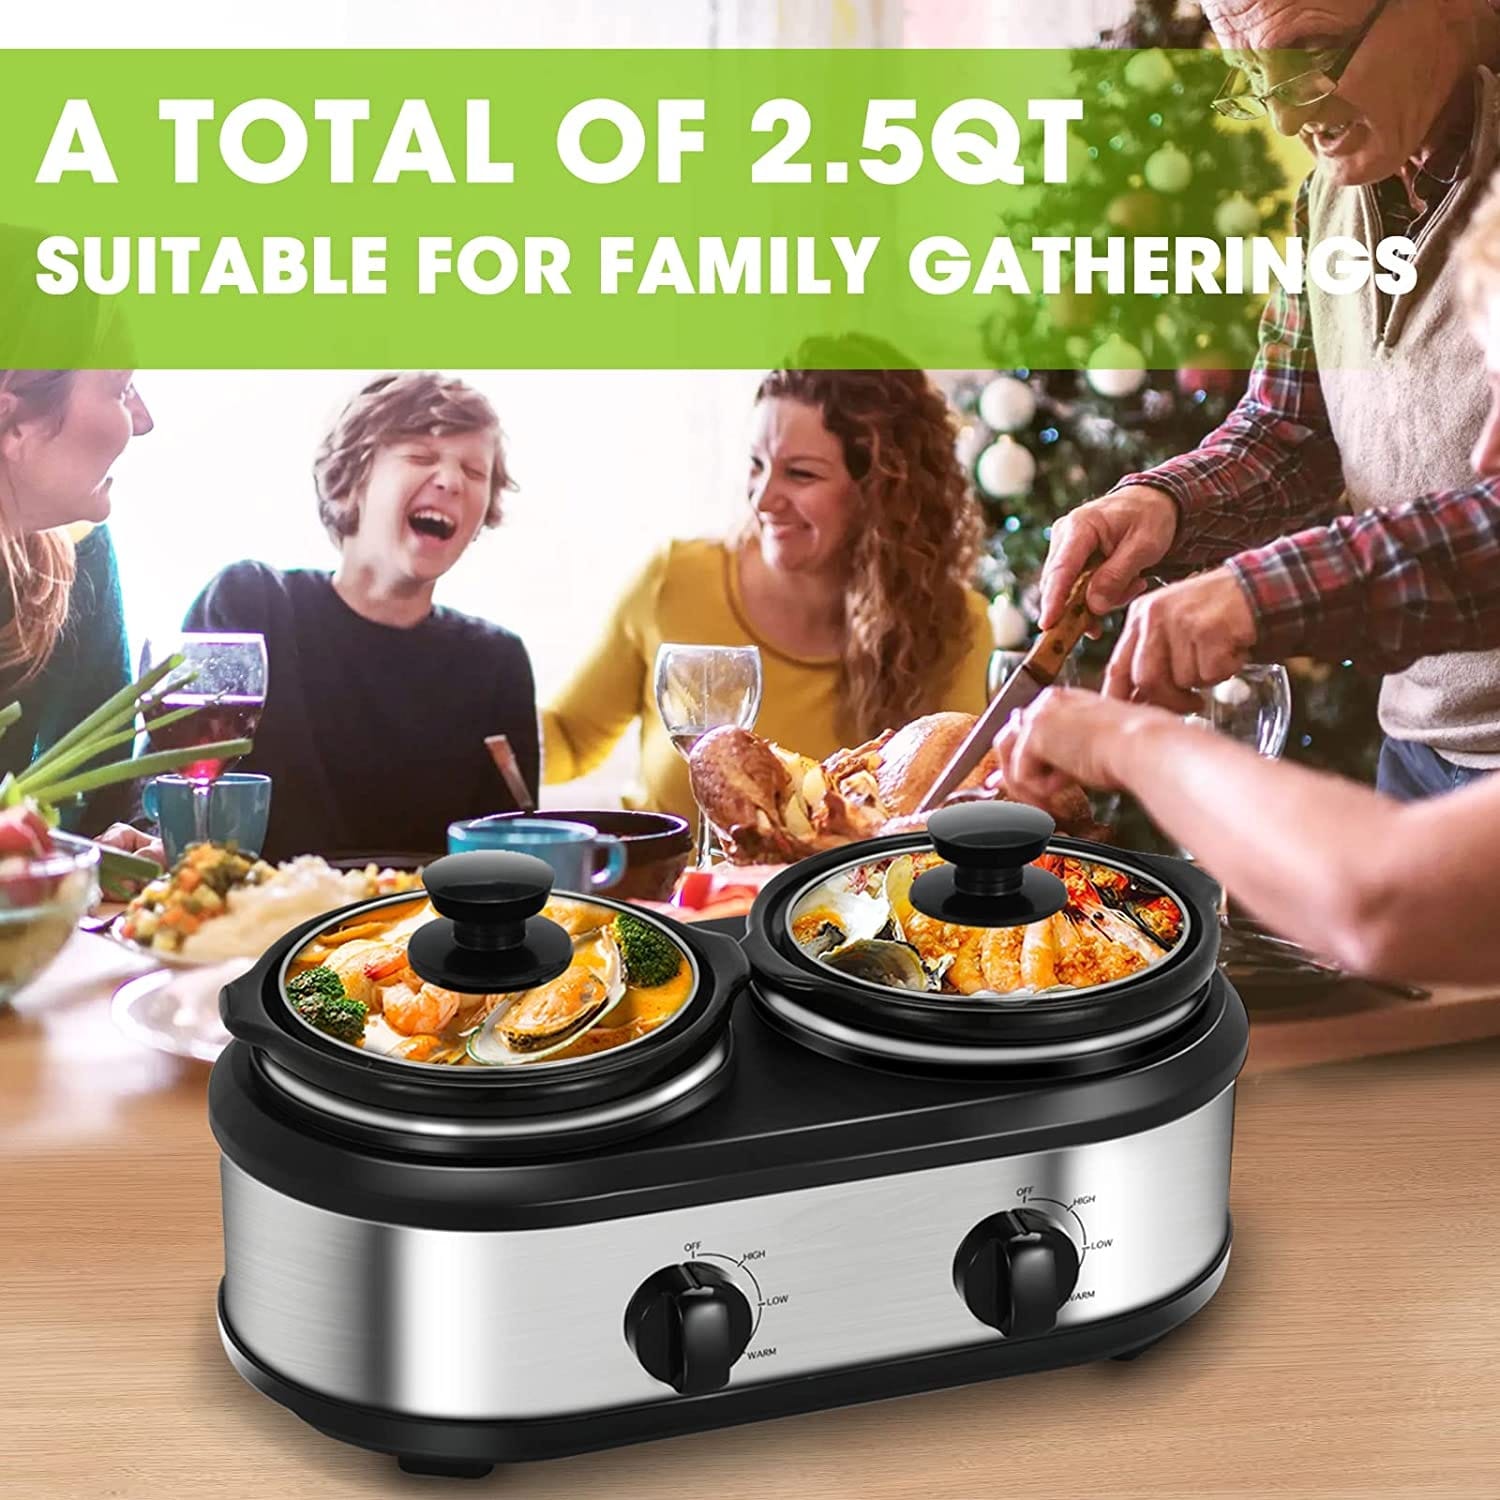 https://ak1.ostkcdn.com/images/products/is/images/direct/909c898871701ea8e025d860858b5918b4a4c2e2/Double-Slow-Cooker%2C-2-X-1.25QT-Mini-Individual-Pots-with-Adjustable-Temp%2C-Dishwasher-Safe%2C-Portable-Buffet-Server-and-Warmer.jpg